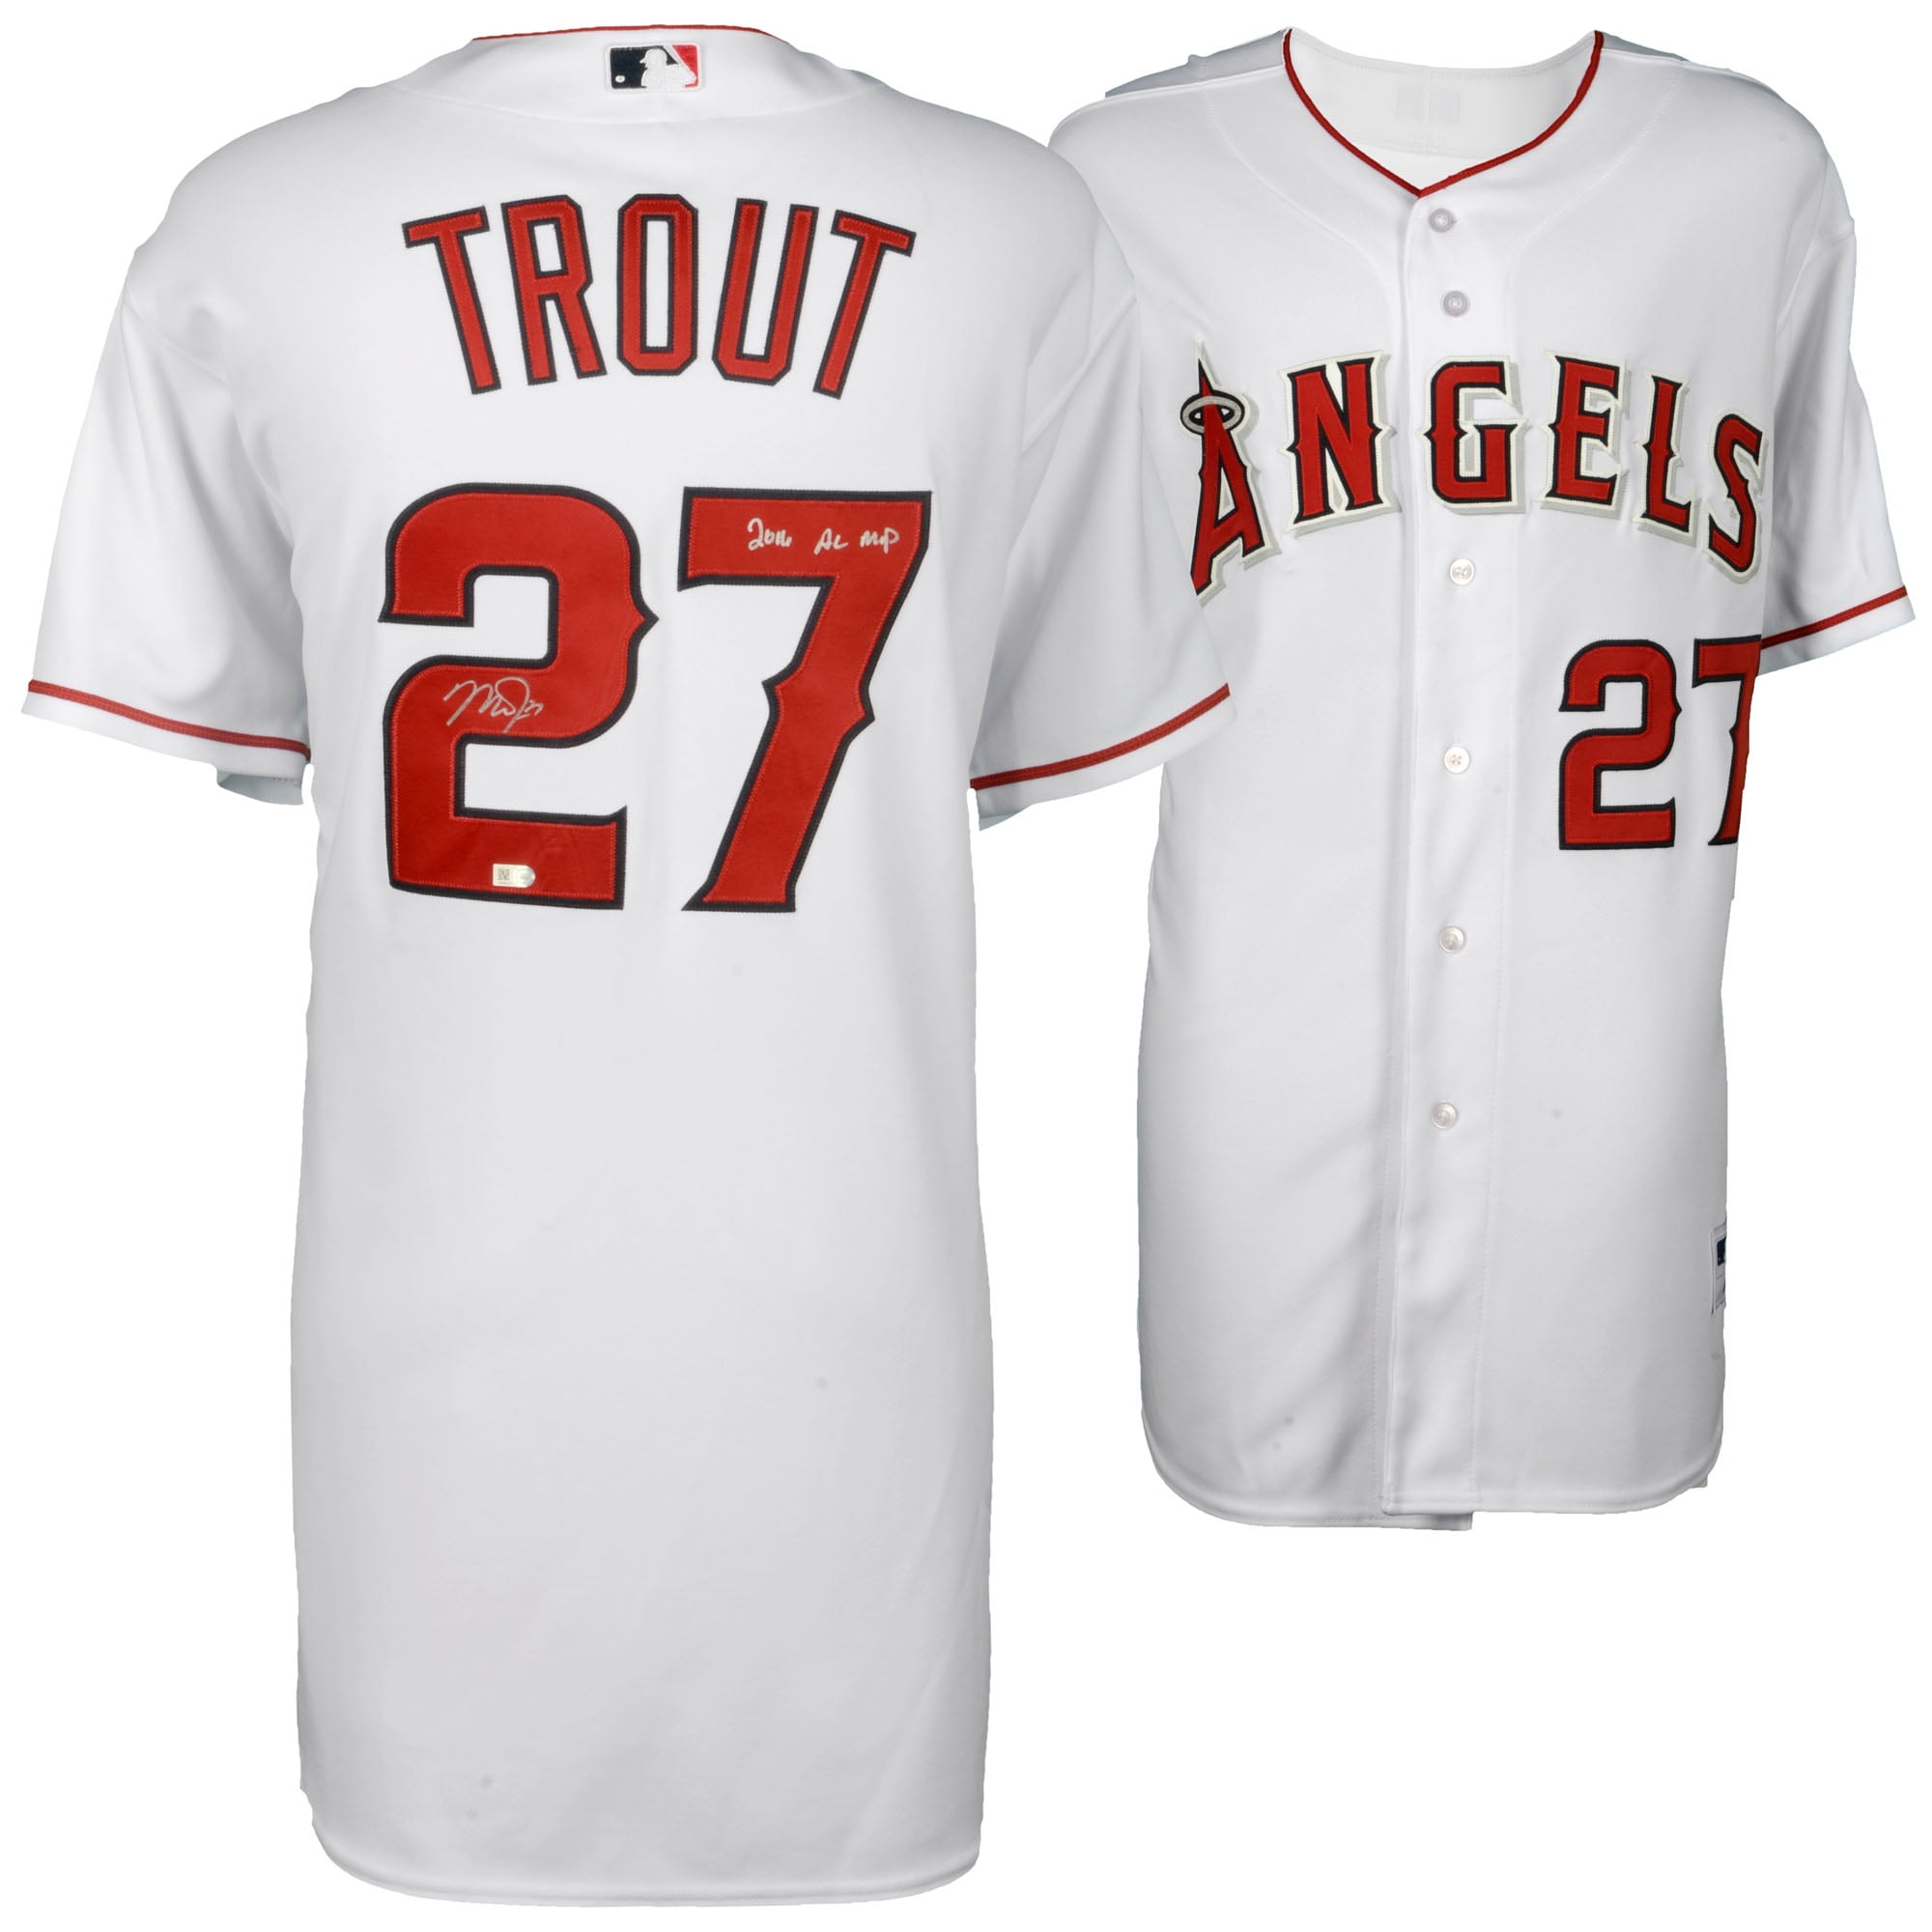 trout jersey for sale